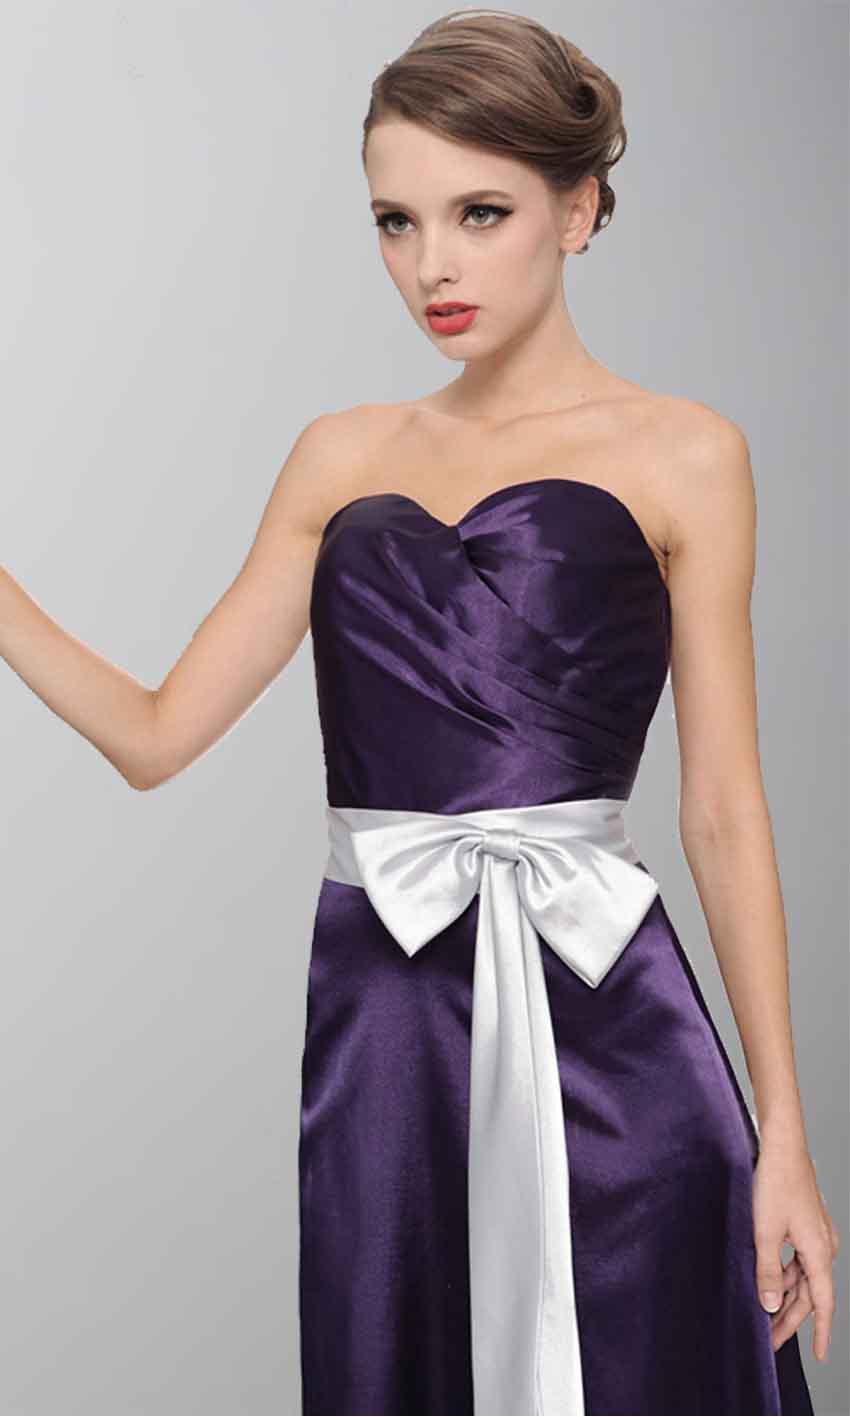 Wedding - Purple Strapless Sweetheart Satin Long Bridesmaid Dress KSP151 [KSP151] - £83.00 : Cheap Prom Dresses Uk, Bridesmaid Dresses, 2014 Prom & Evening Dresses, Look for cheap elegant prom dresses 2014, cocktail gowns, or dresses for special occasions? kissprom